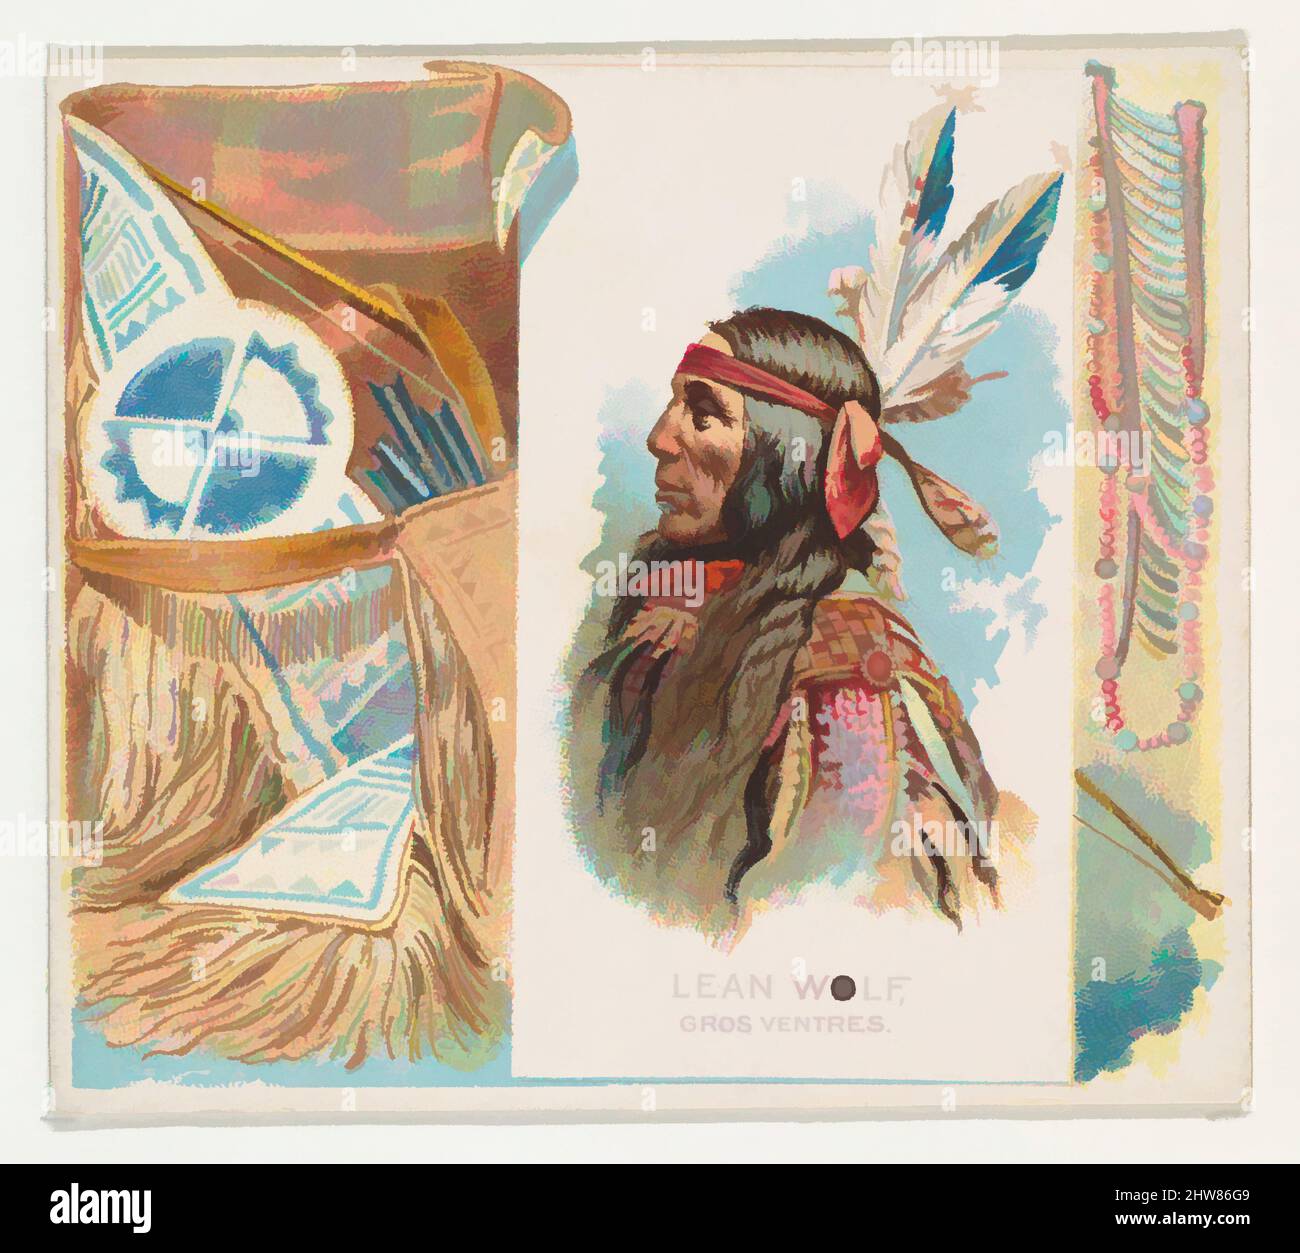 Art inspired by Lean Wolf, Gros Ventres, from the American Indian Chiefs series (N36) for Allen & Ginter Cigarettes, 1888, Commercial color lithograph, Sheet: 2 7/8 x 3 1/4 in. (7.3 x 8.3 cm), Trade cards from the 'American Indian Chiefs' series (N36), issued in 1888 in a set of 50, Classic works modernized by Artotop with a splash of modernity. Shapes, color and value, eye-catching visual impact on art. Emotions through freedom of artworks in a contemporary way. A timeless message pursuing a wildly creative new direction. Artists turning to the digital medium and creating the Artotop NFT Stock Photo